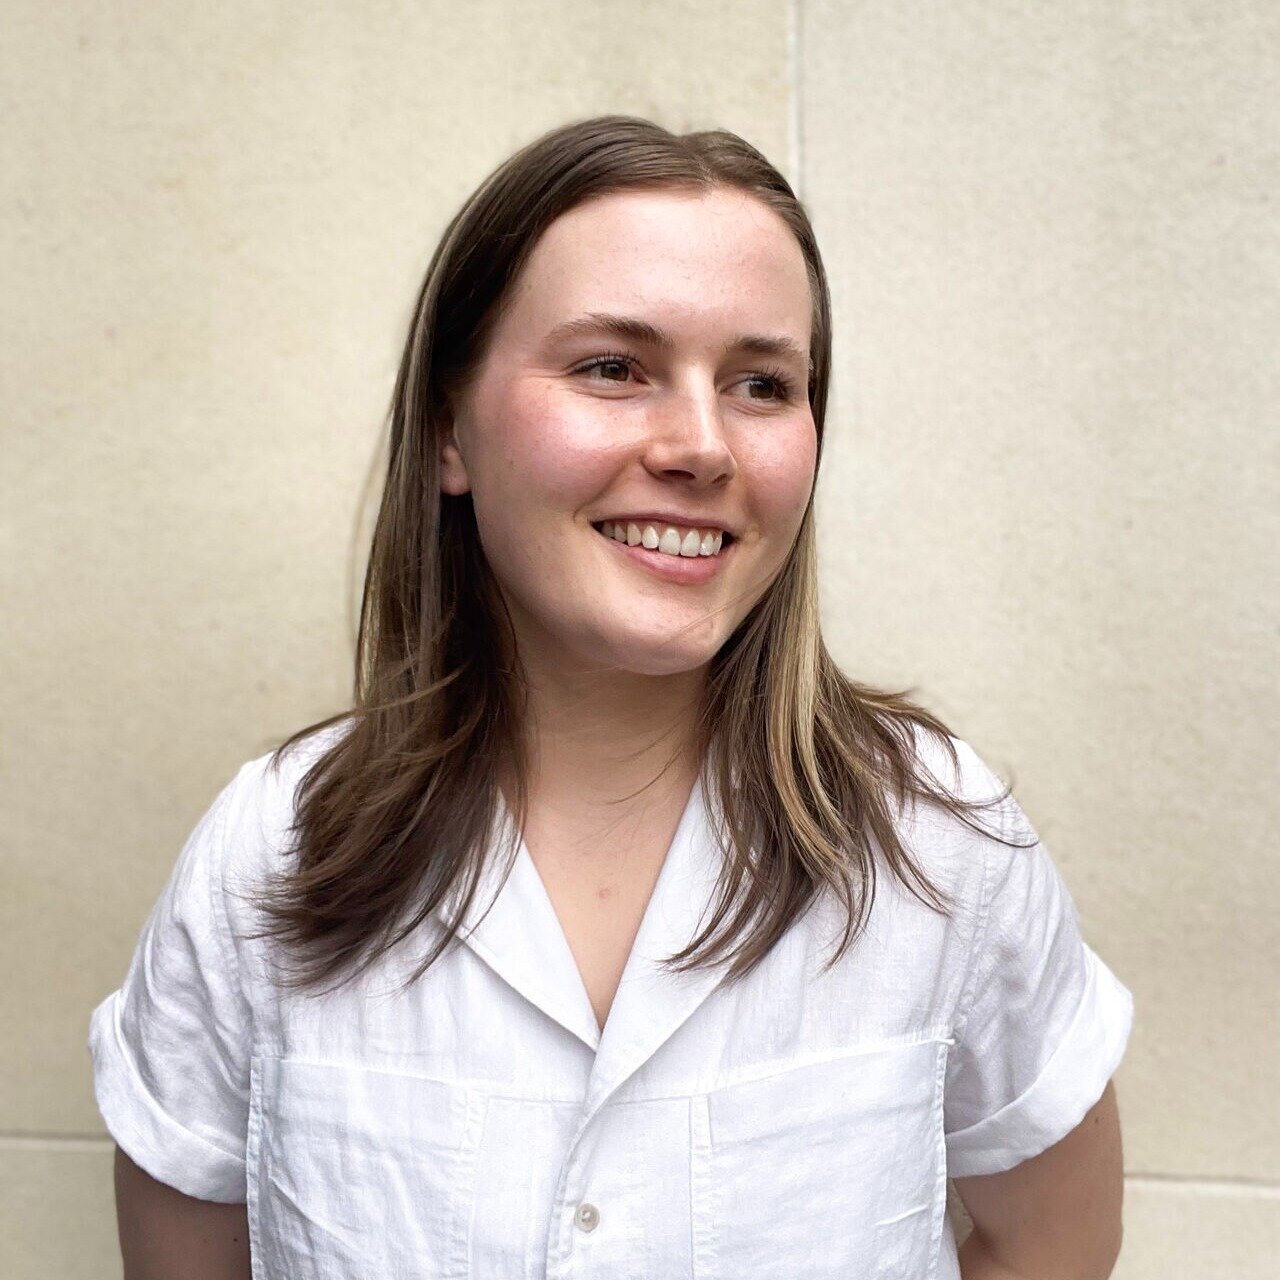 ⚡We're thrilled to welcome Ella Mackenzie to our team! And we're even more thrilled to see the growth in the number of nutritionists and clinicians being part of a growing wave of professionals choosing to specialise in menstrual and hormonal health 